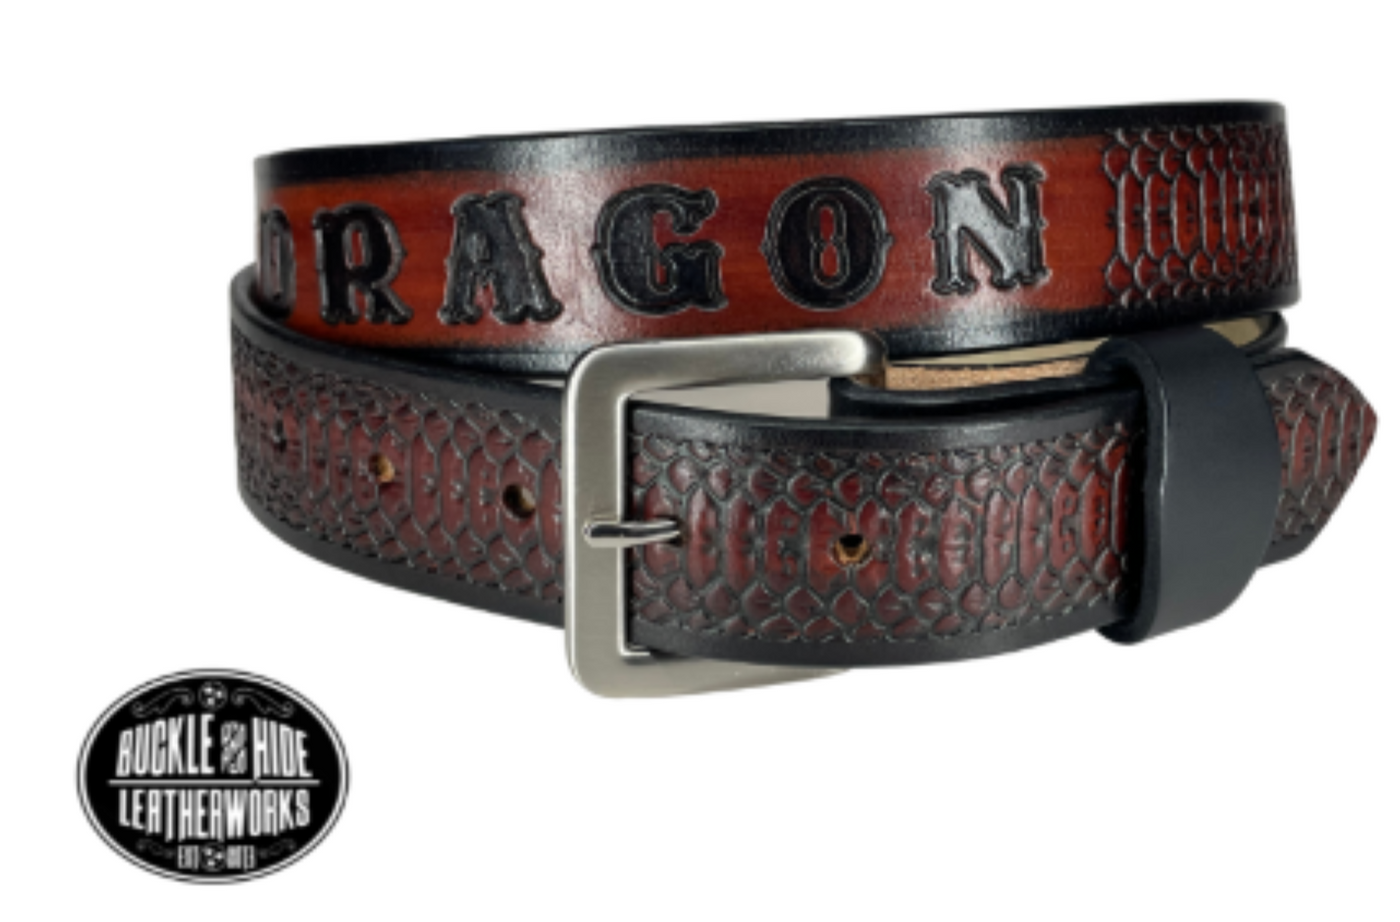 "The Rattler" is a handmade real leather belt made from a single strip of cowhide shoulder leather that is 8-9 oz. or approx. 1/8" thick. It has smoothed edges and the Serpent pattern embossed on the surface. The antique nickel plated solid brass buckle is snapped in place.  This belt is made just outside Nashville in Smyrna, TN.